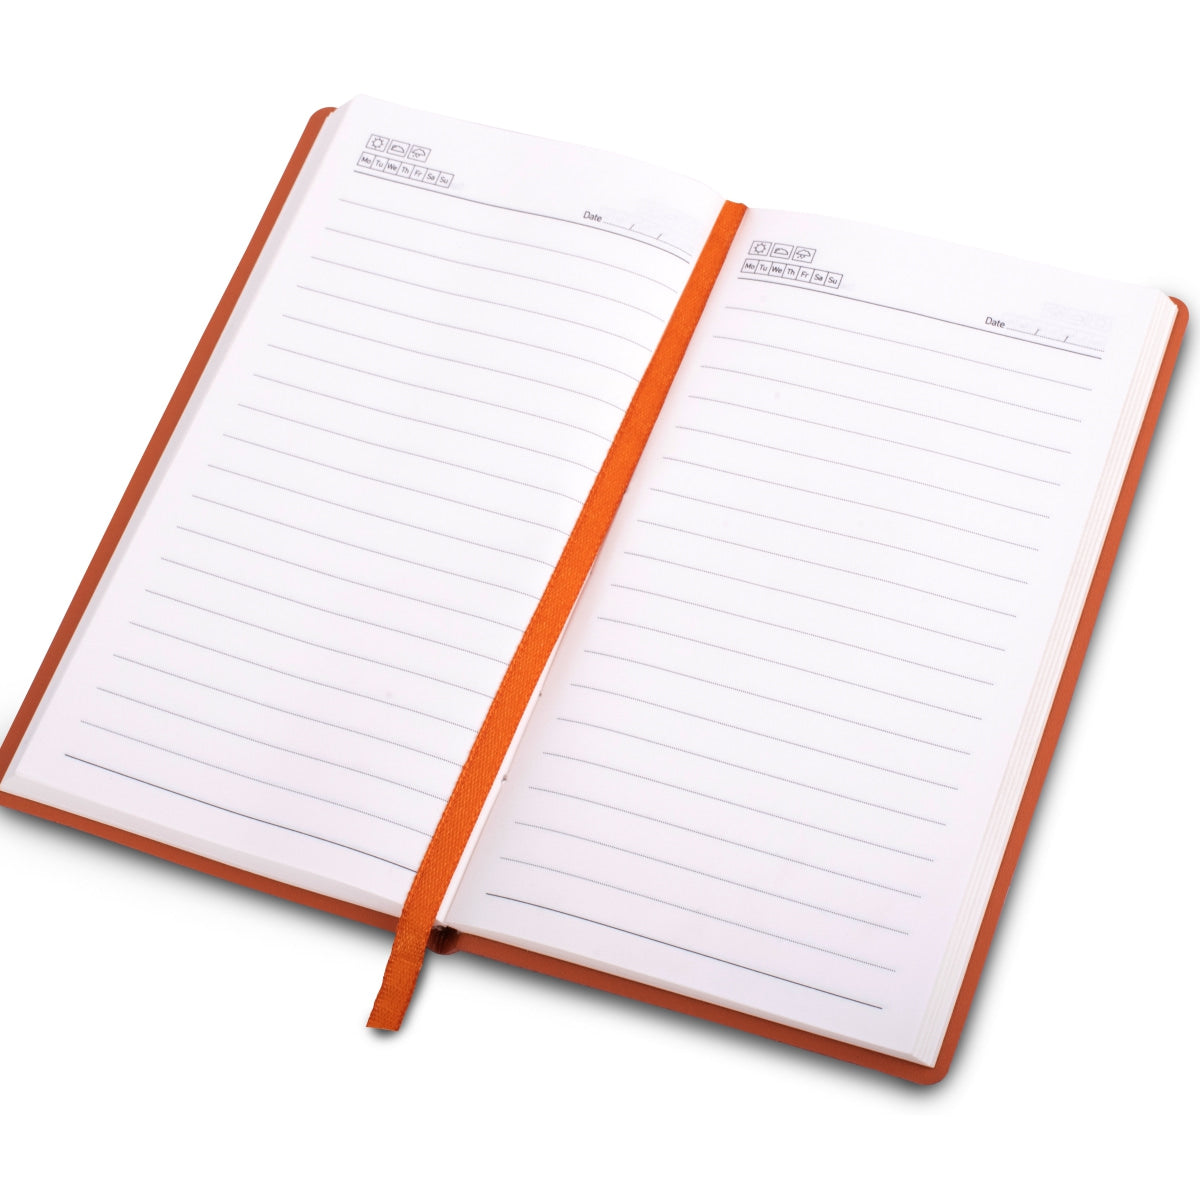 A6 Size Corporate Notebook Diary - For Office Use, Personal Use, or Corporate Gifting BGB137